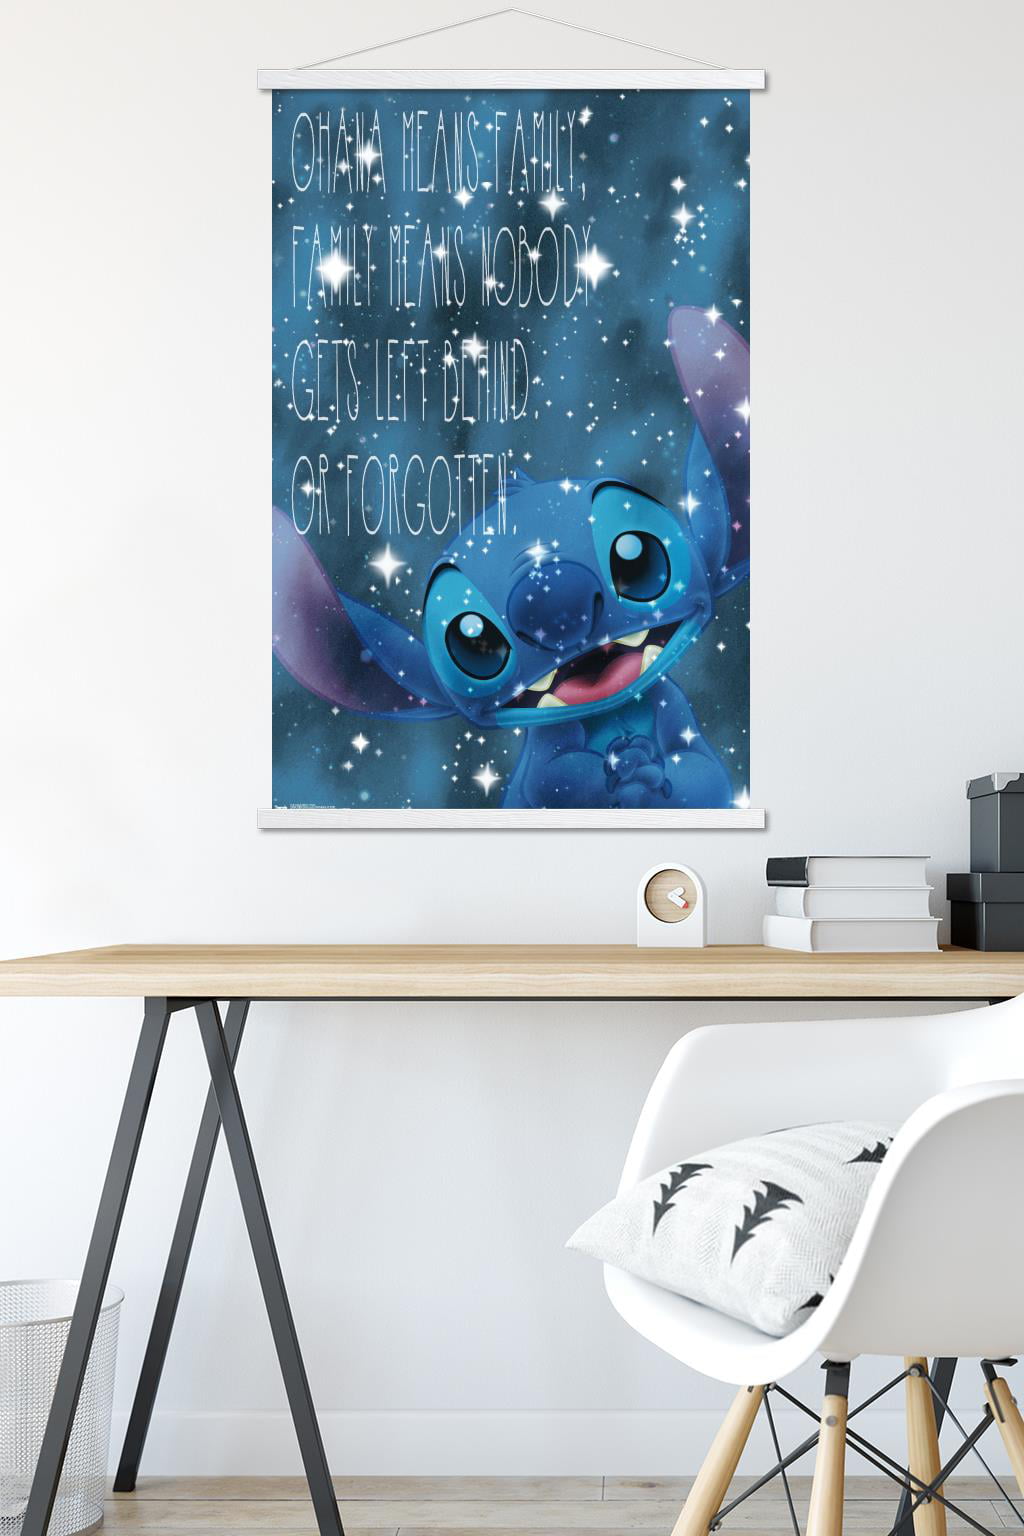 Lilo and Stitch Wall Decor Poster Prints, Set of 5 FRAMELESS 8x10 inc, Lilo  and Stitch Poster, Lilo and Stitch Wall Art, Poster for Girls Room